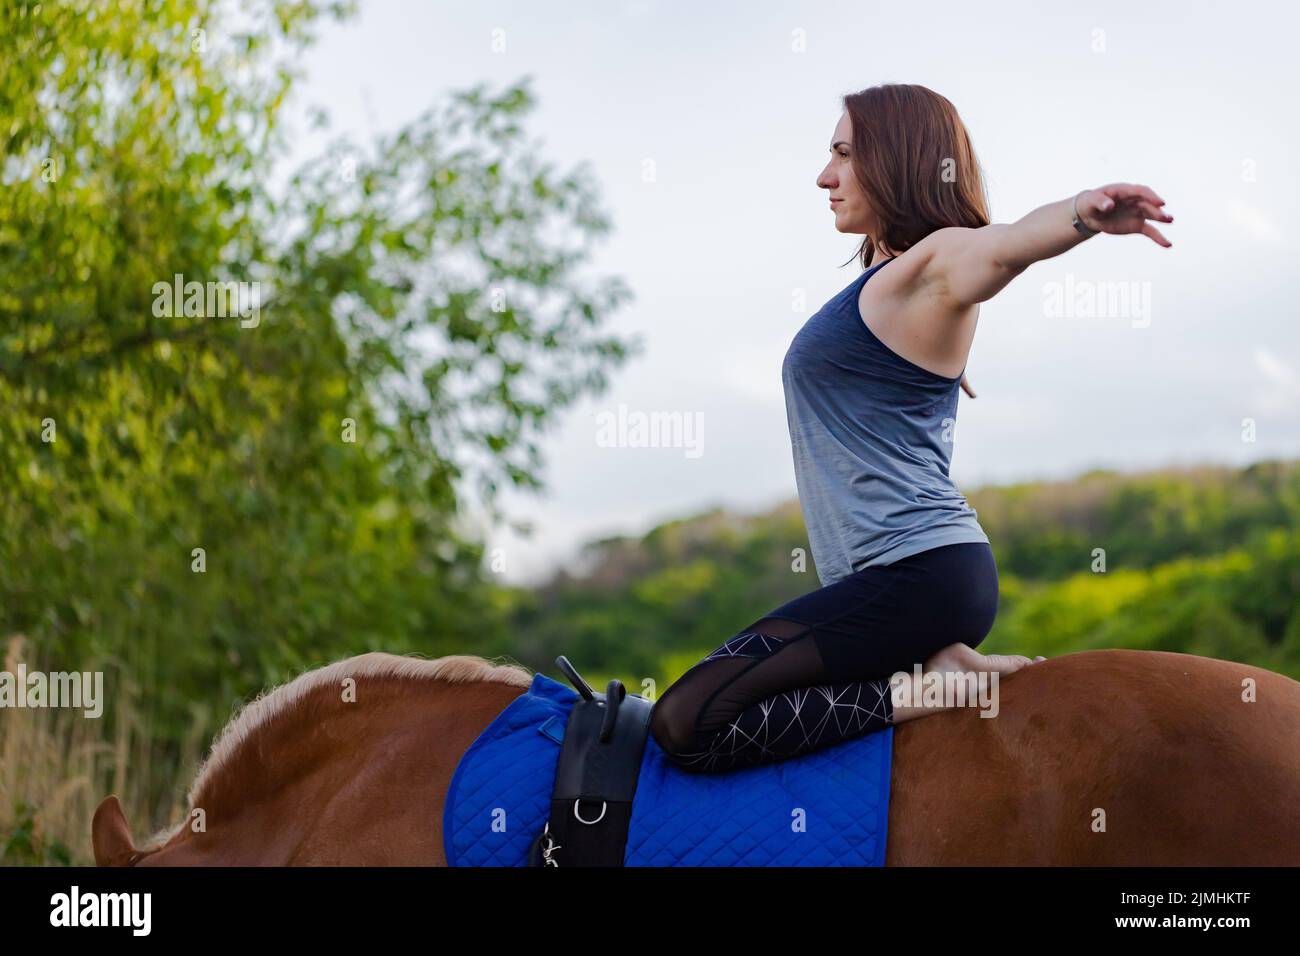 young woman doing yoga on a horse against the backdrop of trees Stock Photo